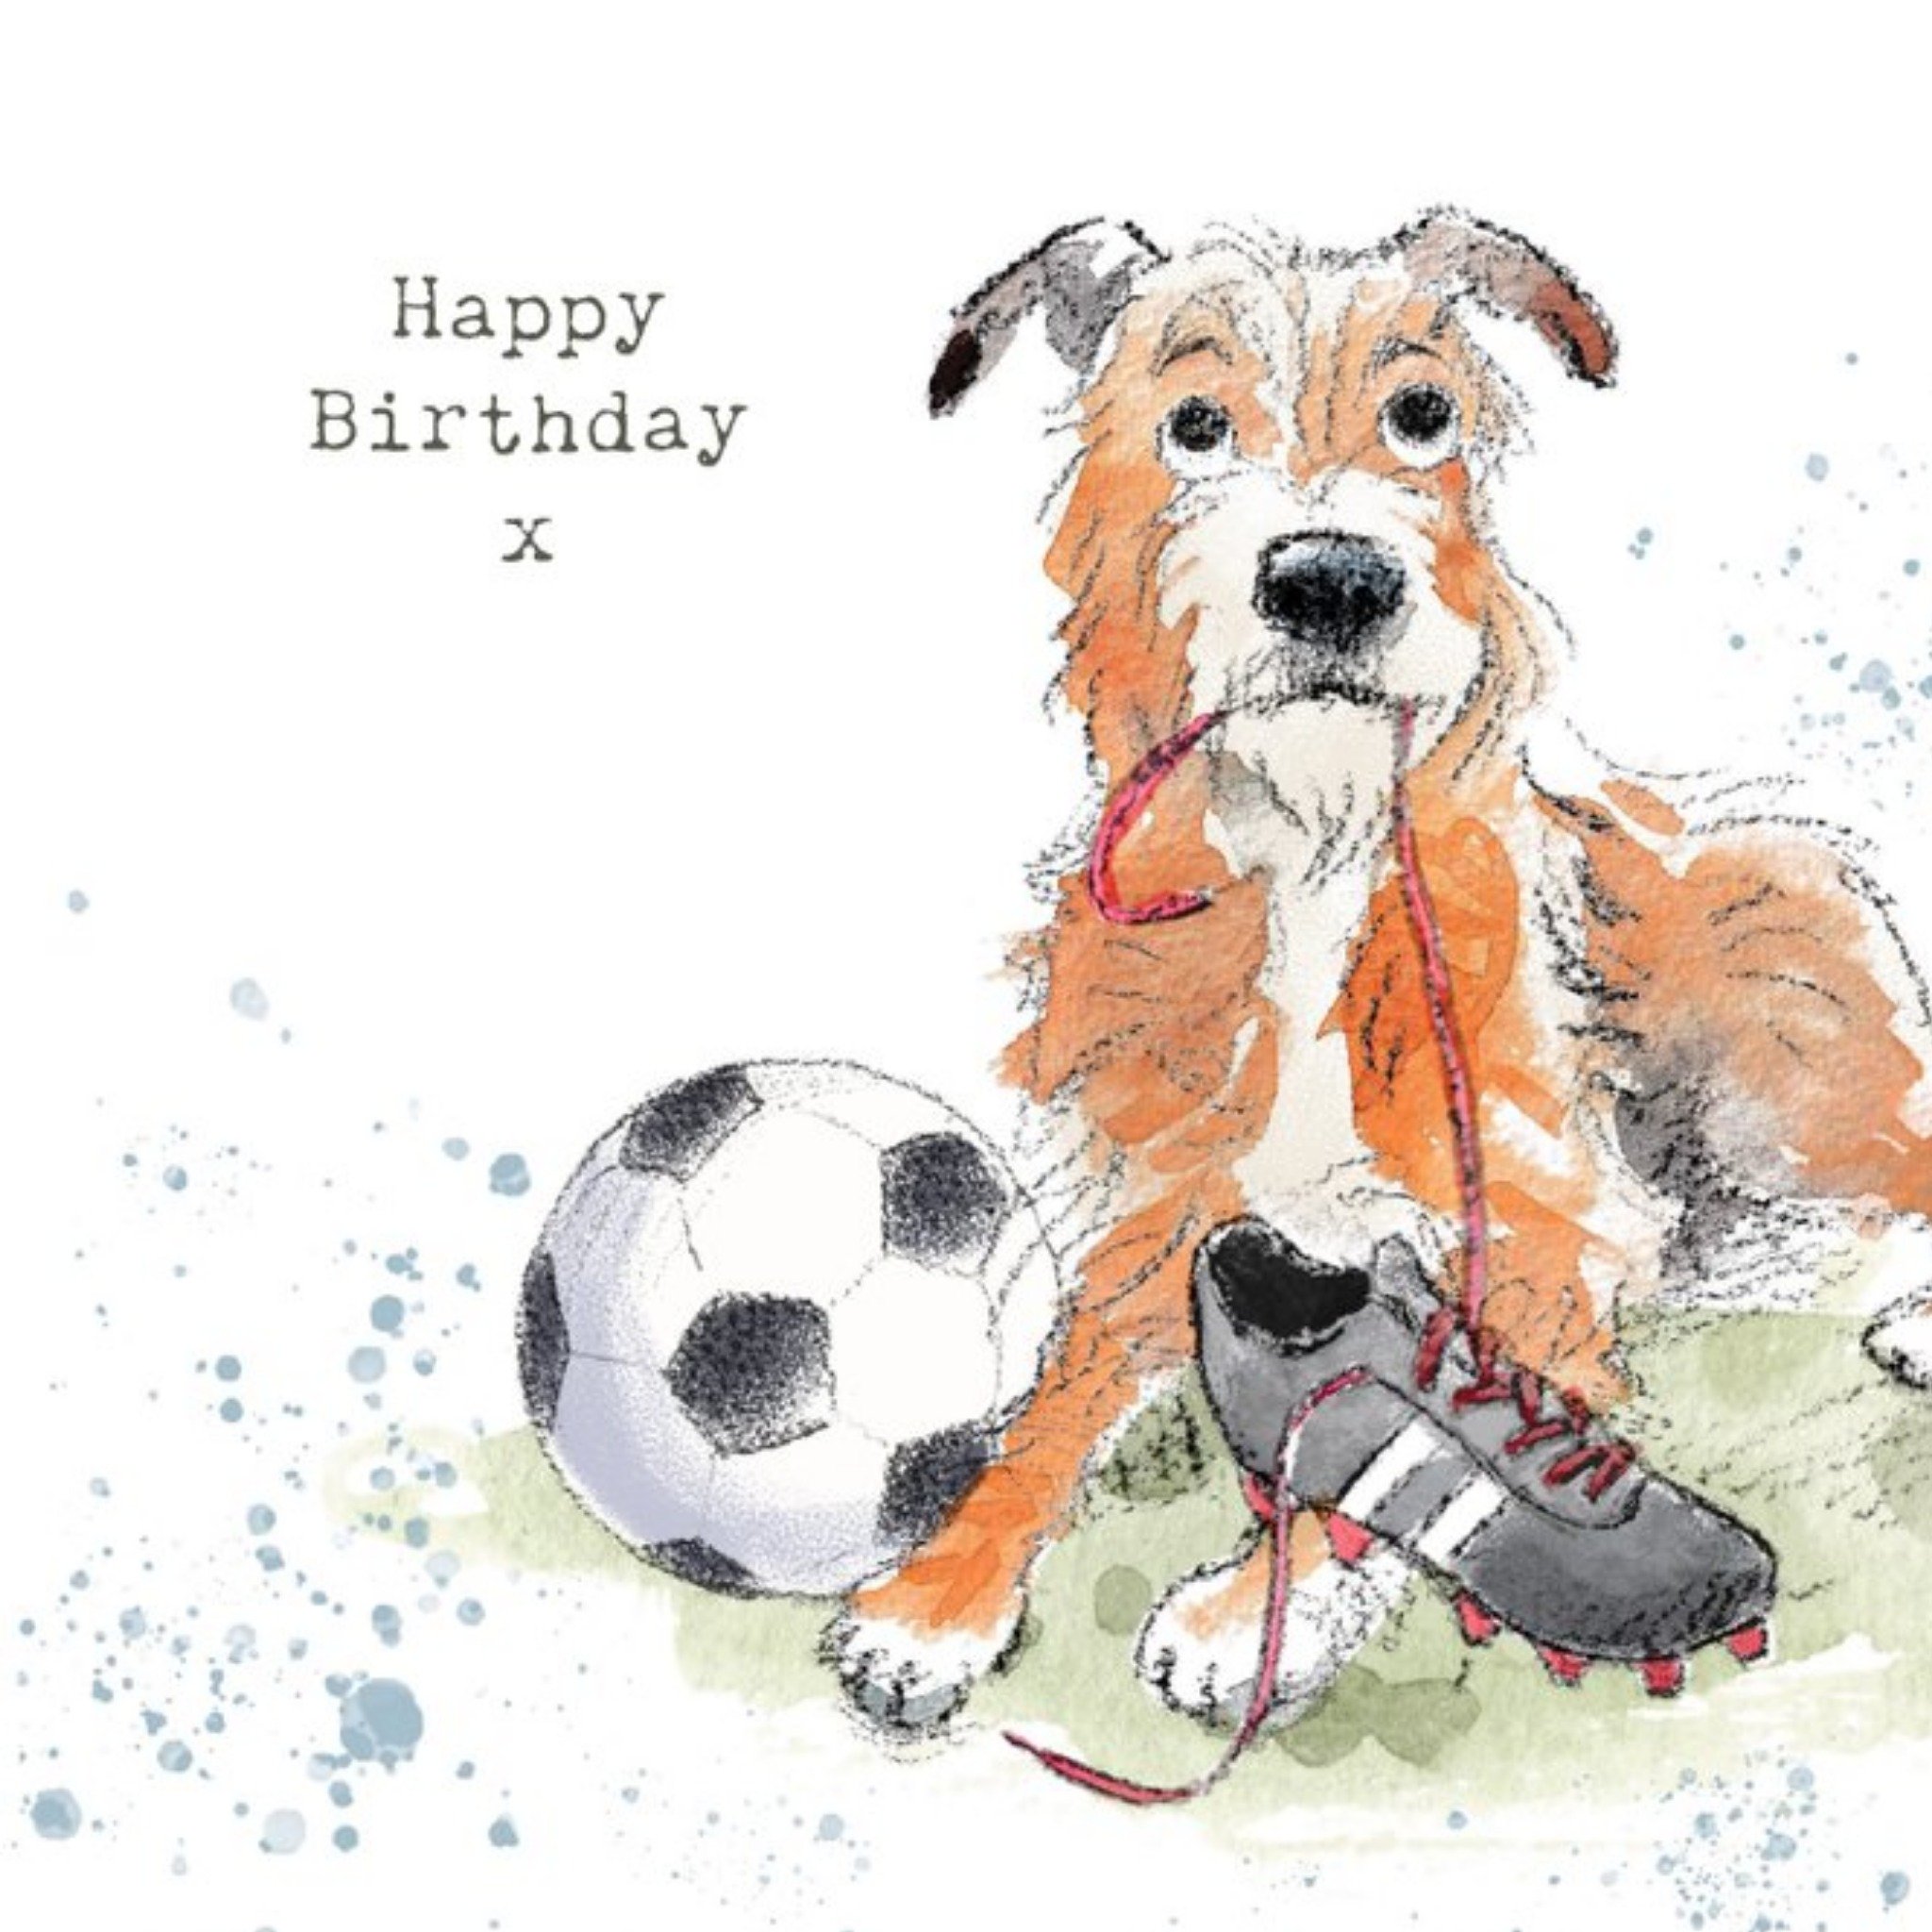 Moonpig Illustration Of A Cute Dog With A Football And A Boot Birthday Card, Large